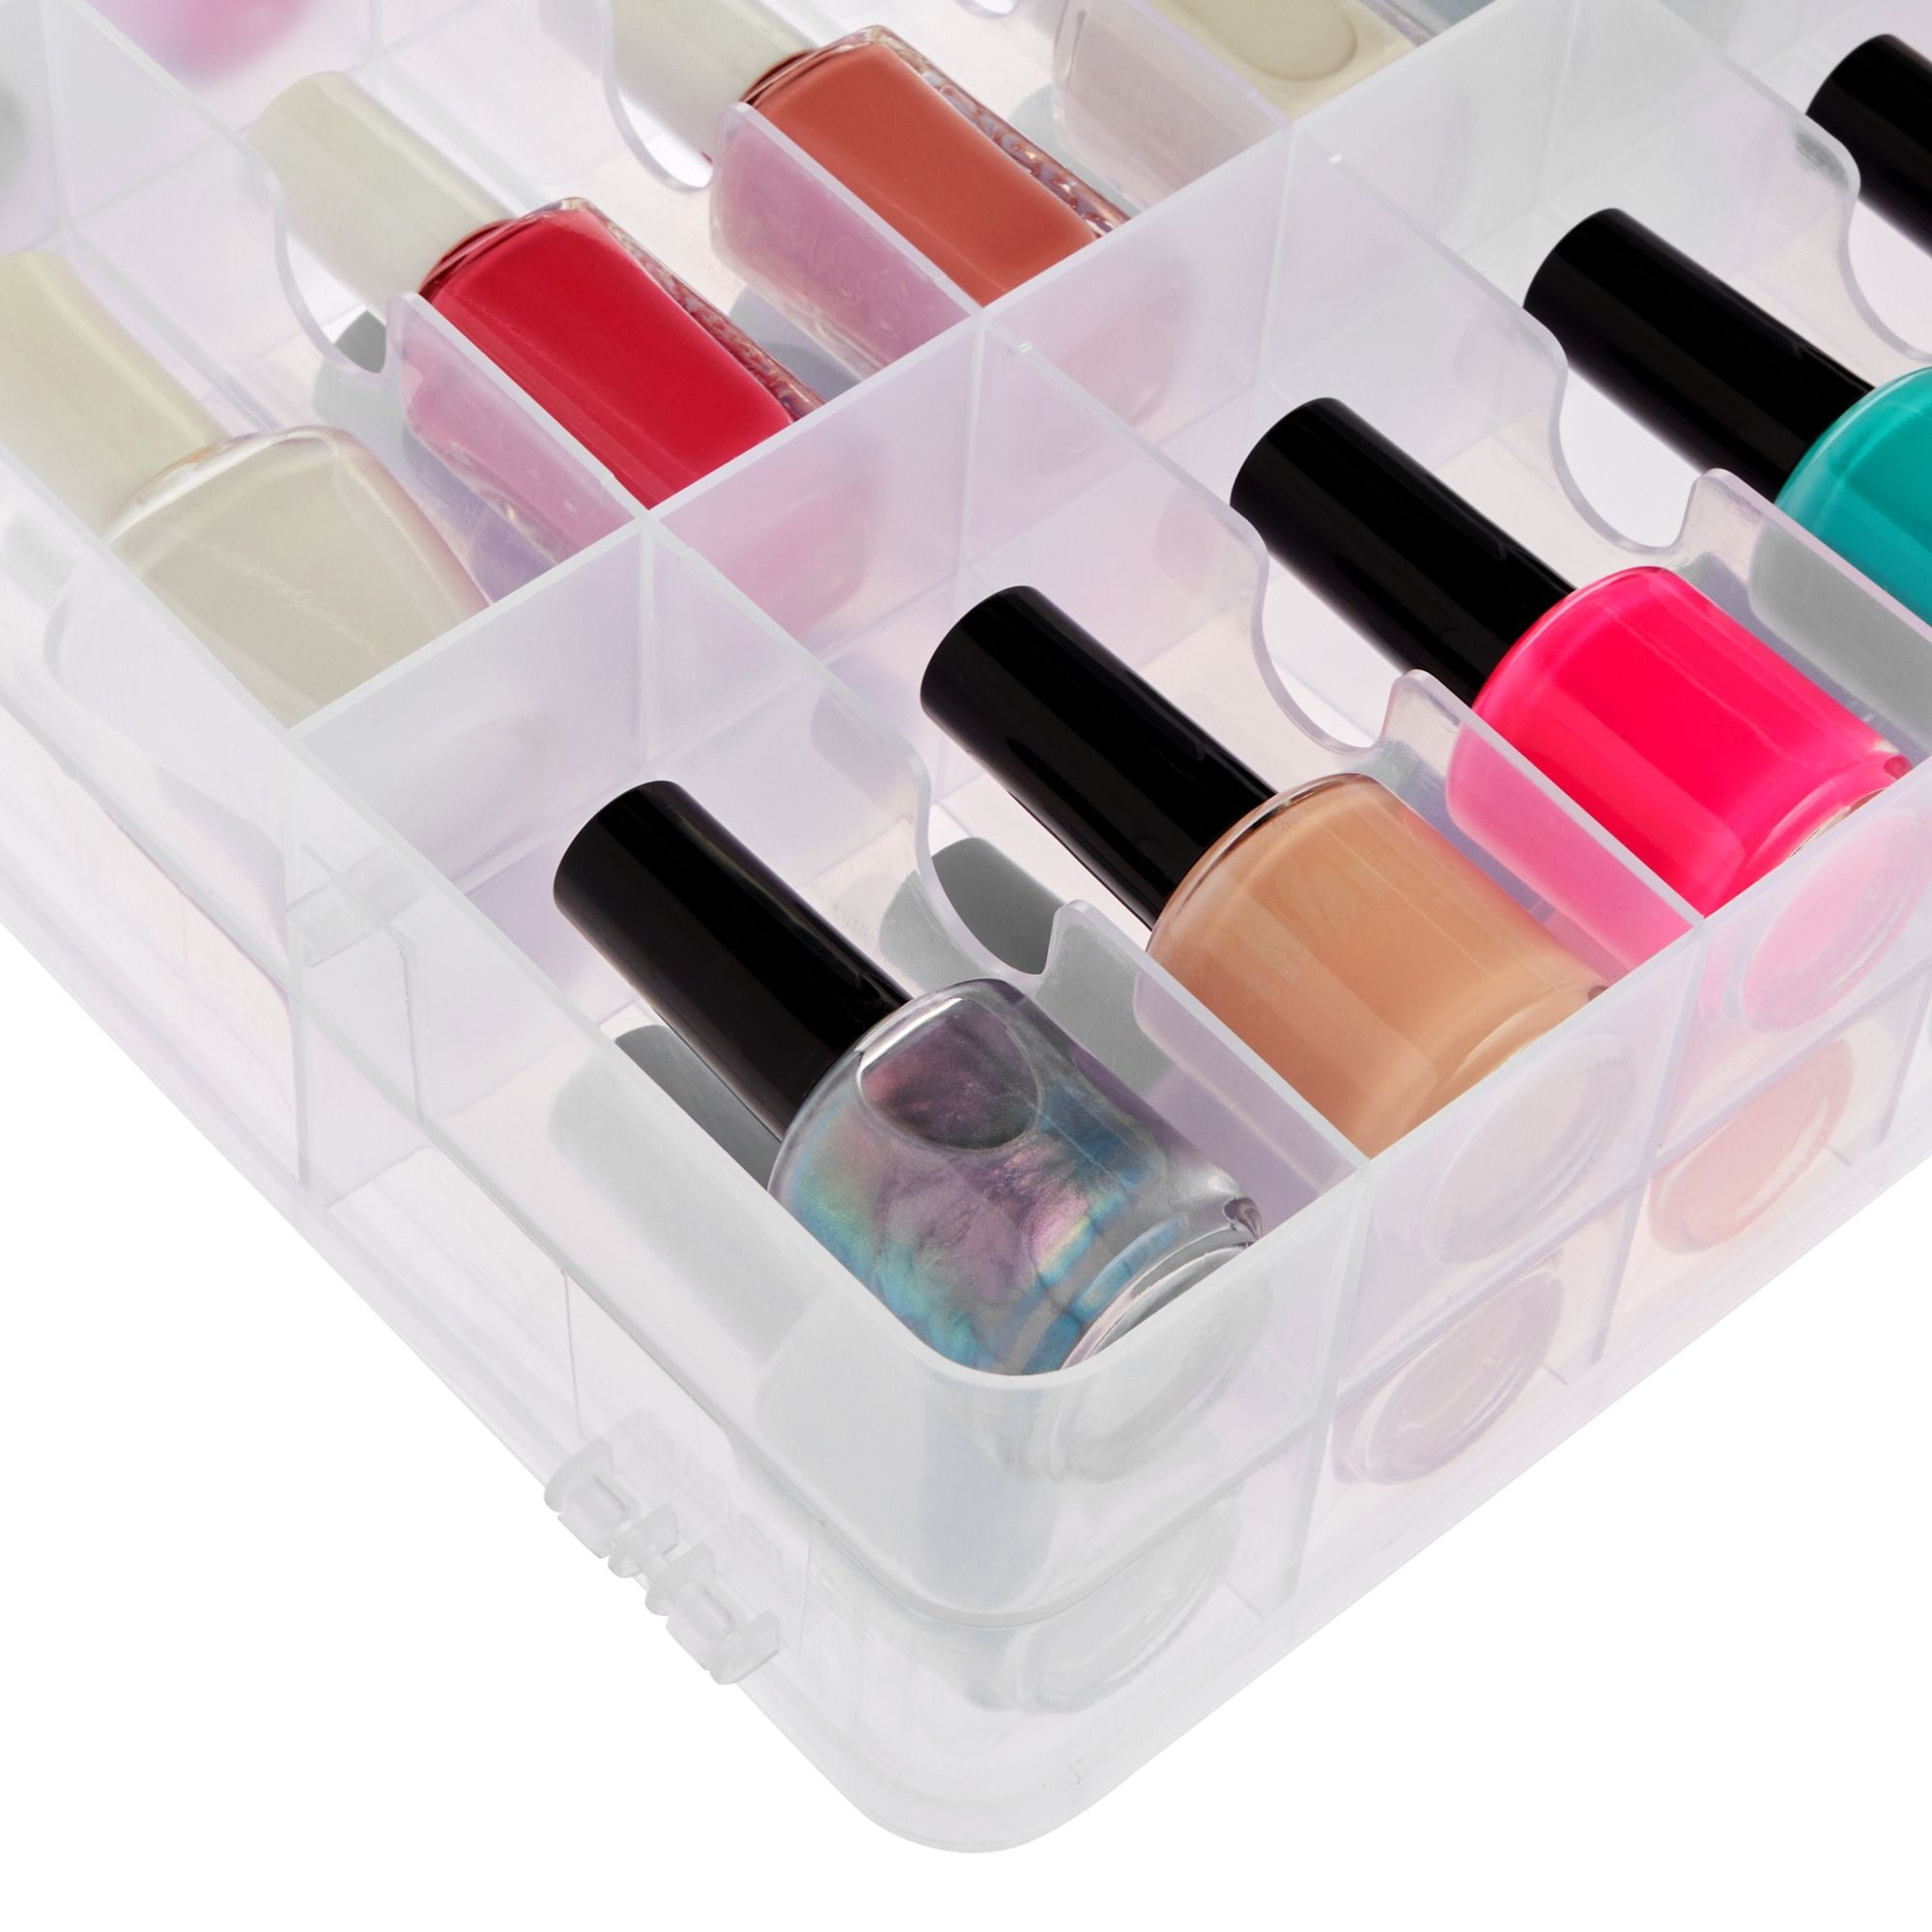 Nail Polish Organizer Holds 72 Bottles (15ml-0.5 fl.oz), Large Nail Polish  Carrying Case with 3 Removable Pouches and 4 Zippered Pockets for Manicure